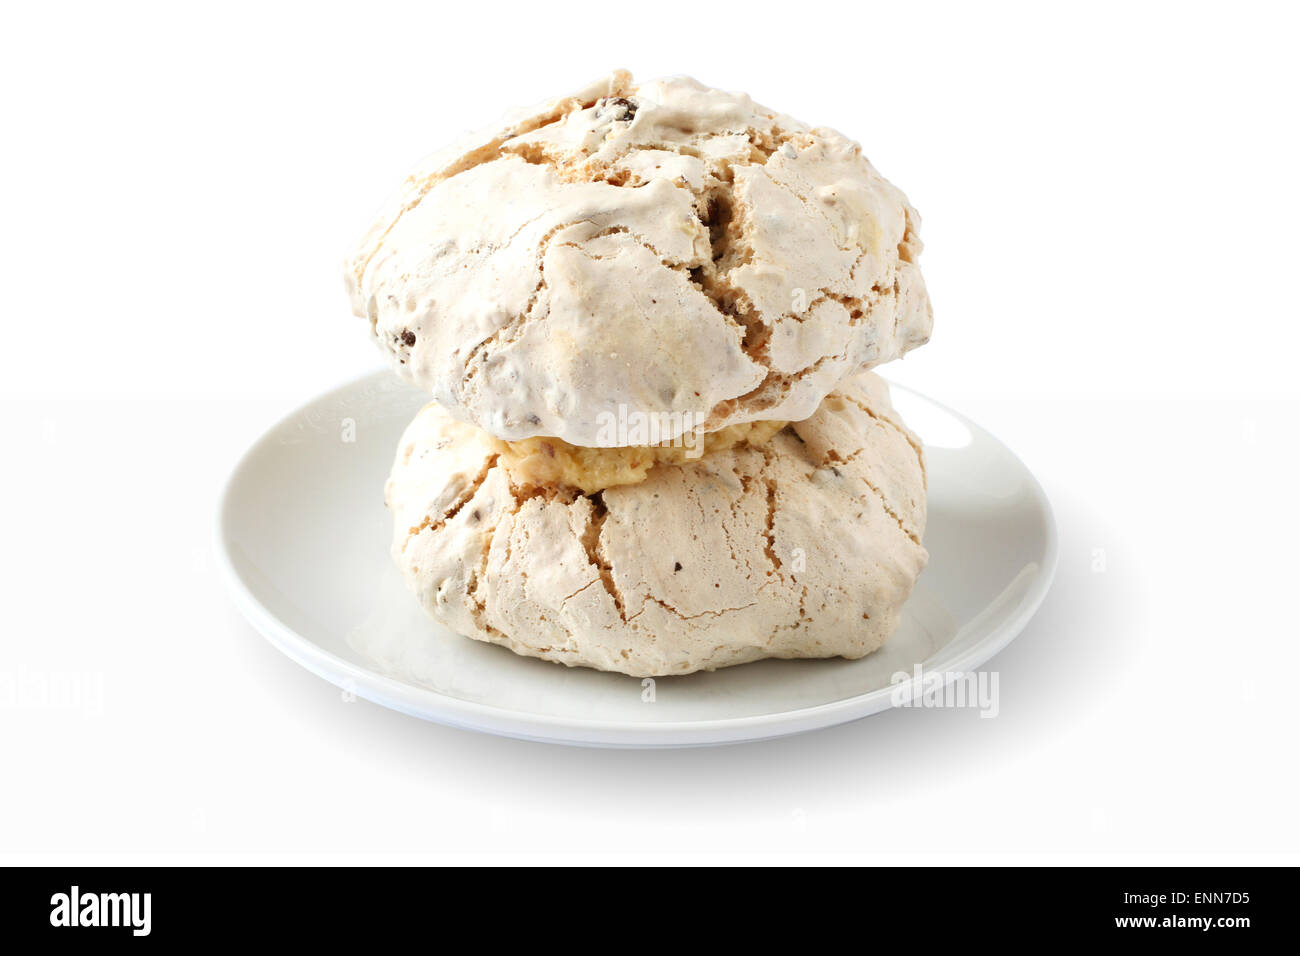 Cake meringue with hazelnuts and dates on white plate against white background Stock Photo